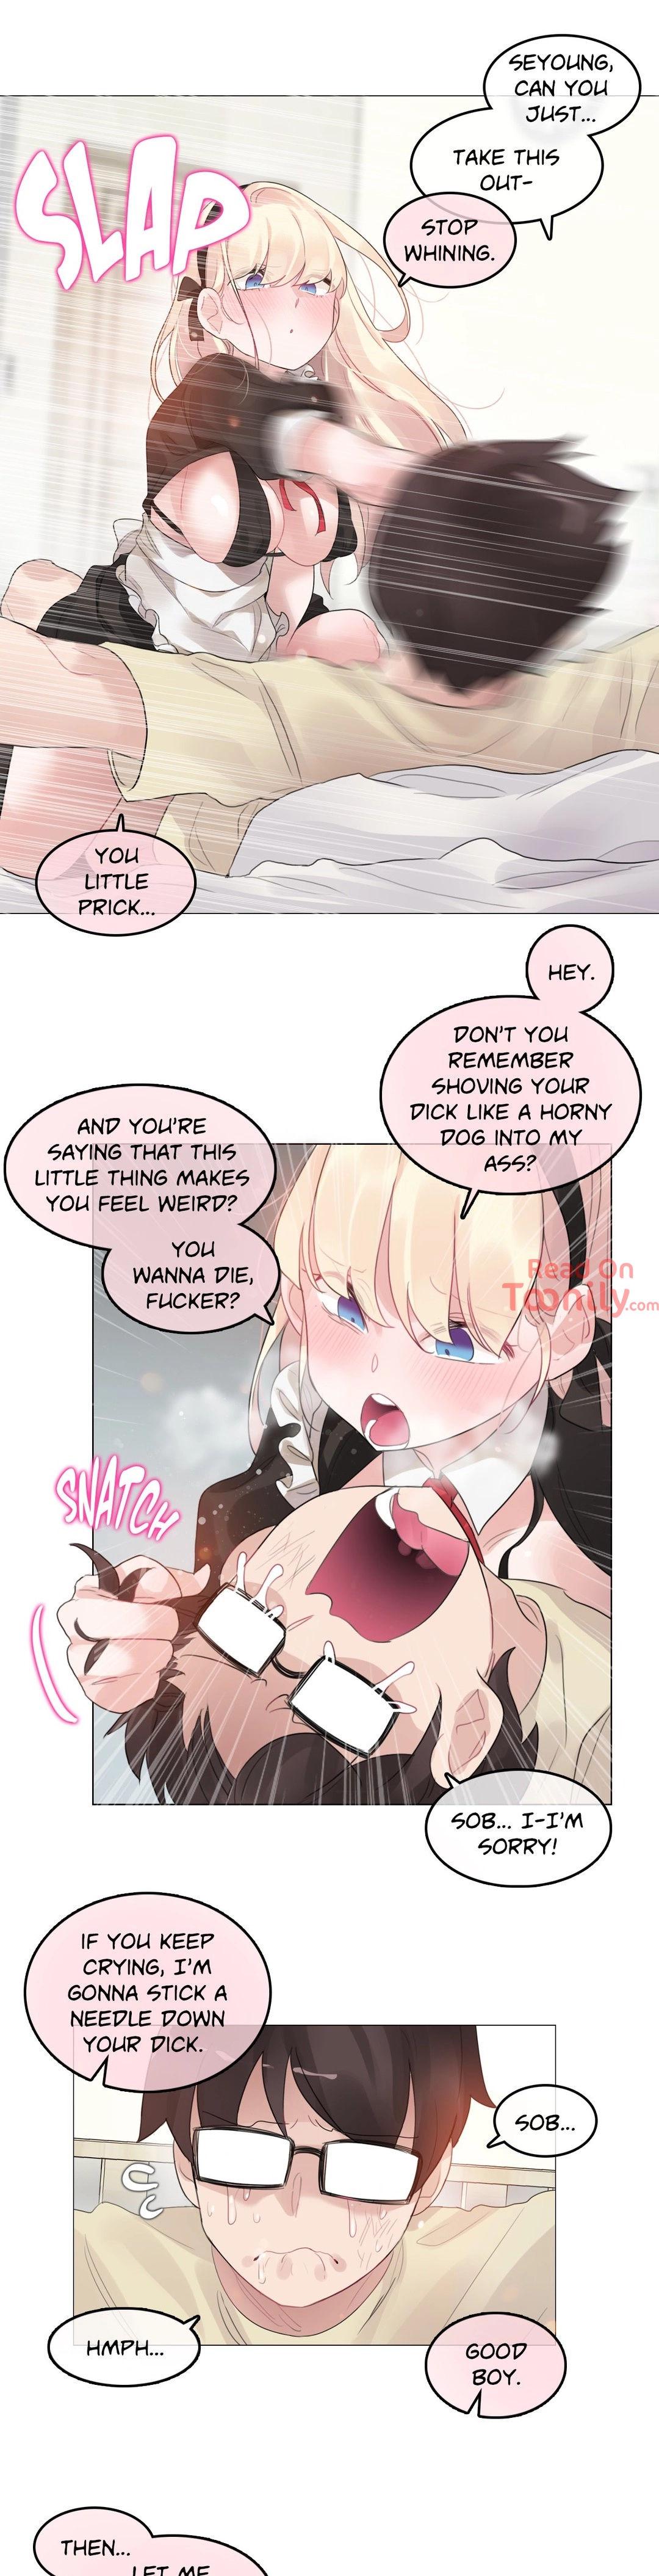 A Pervert's Daily Life • Chapter 66-70 97